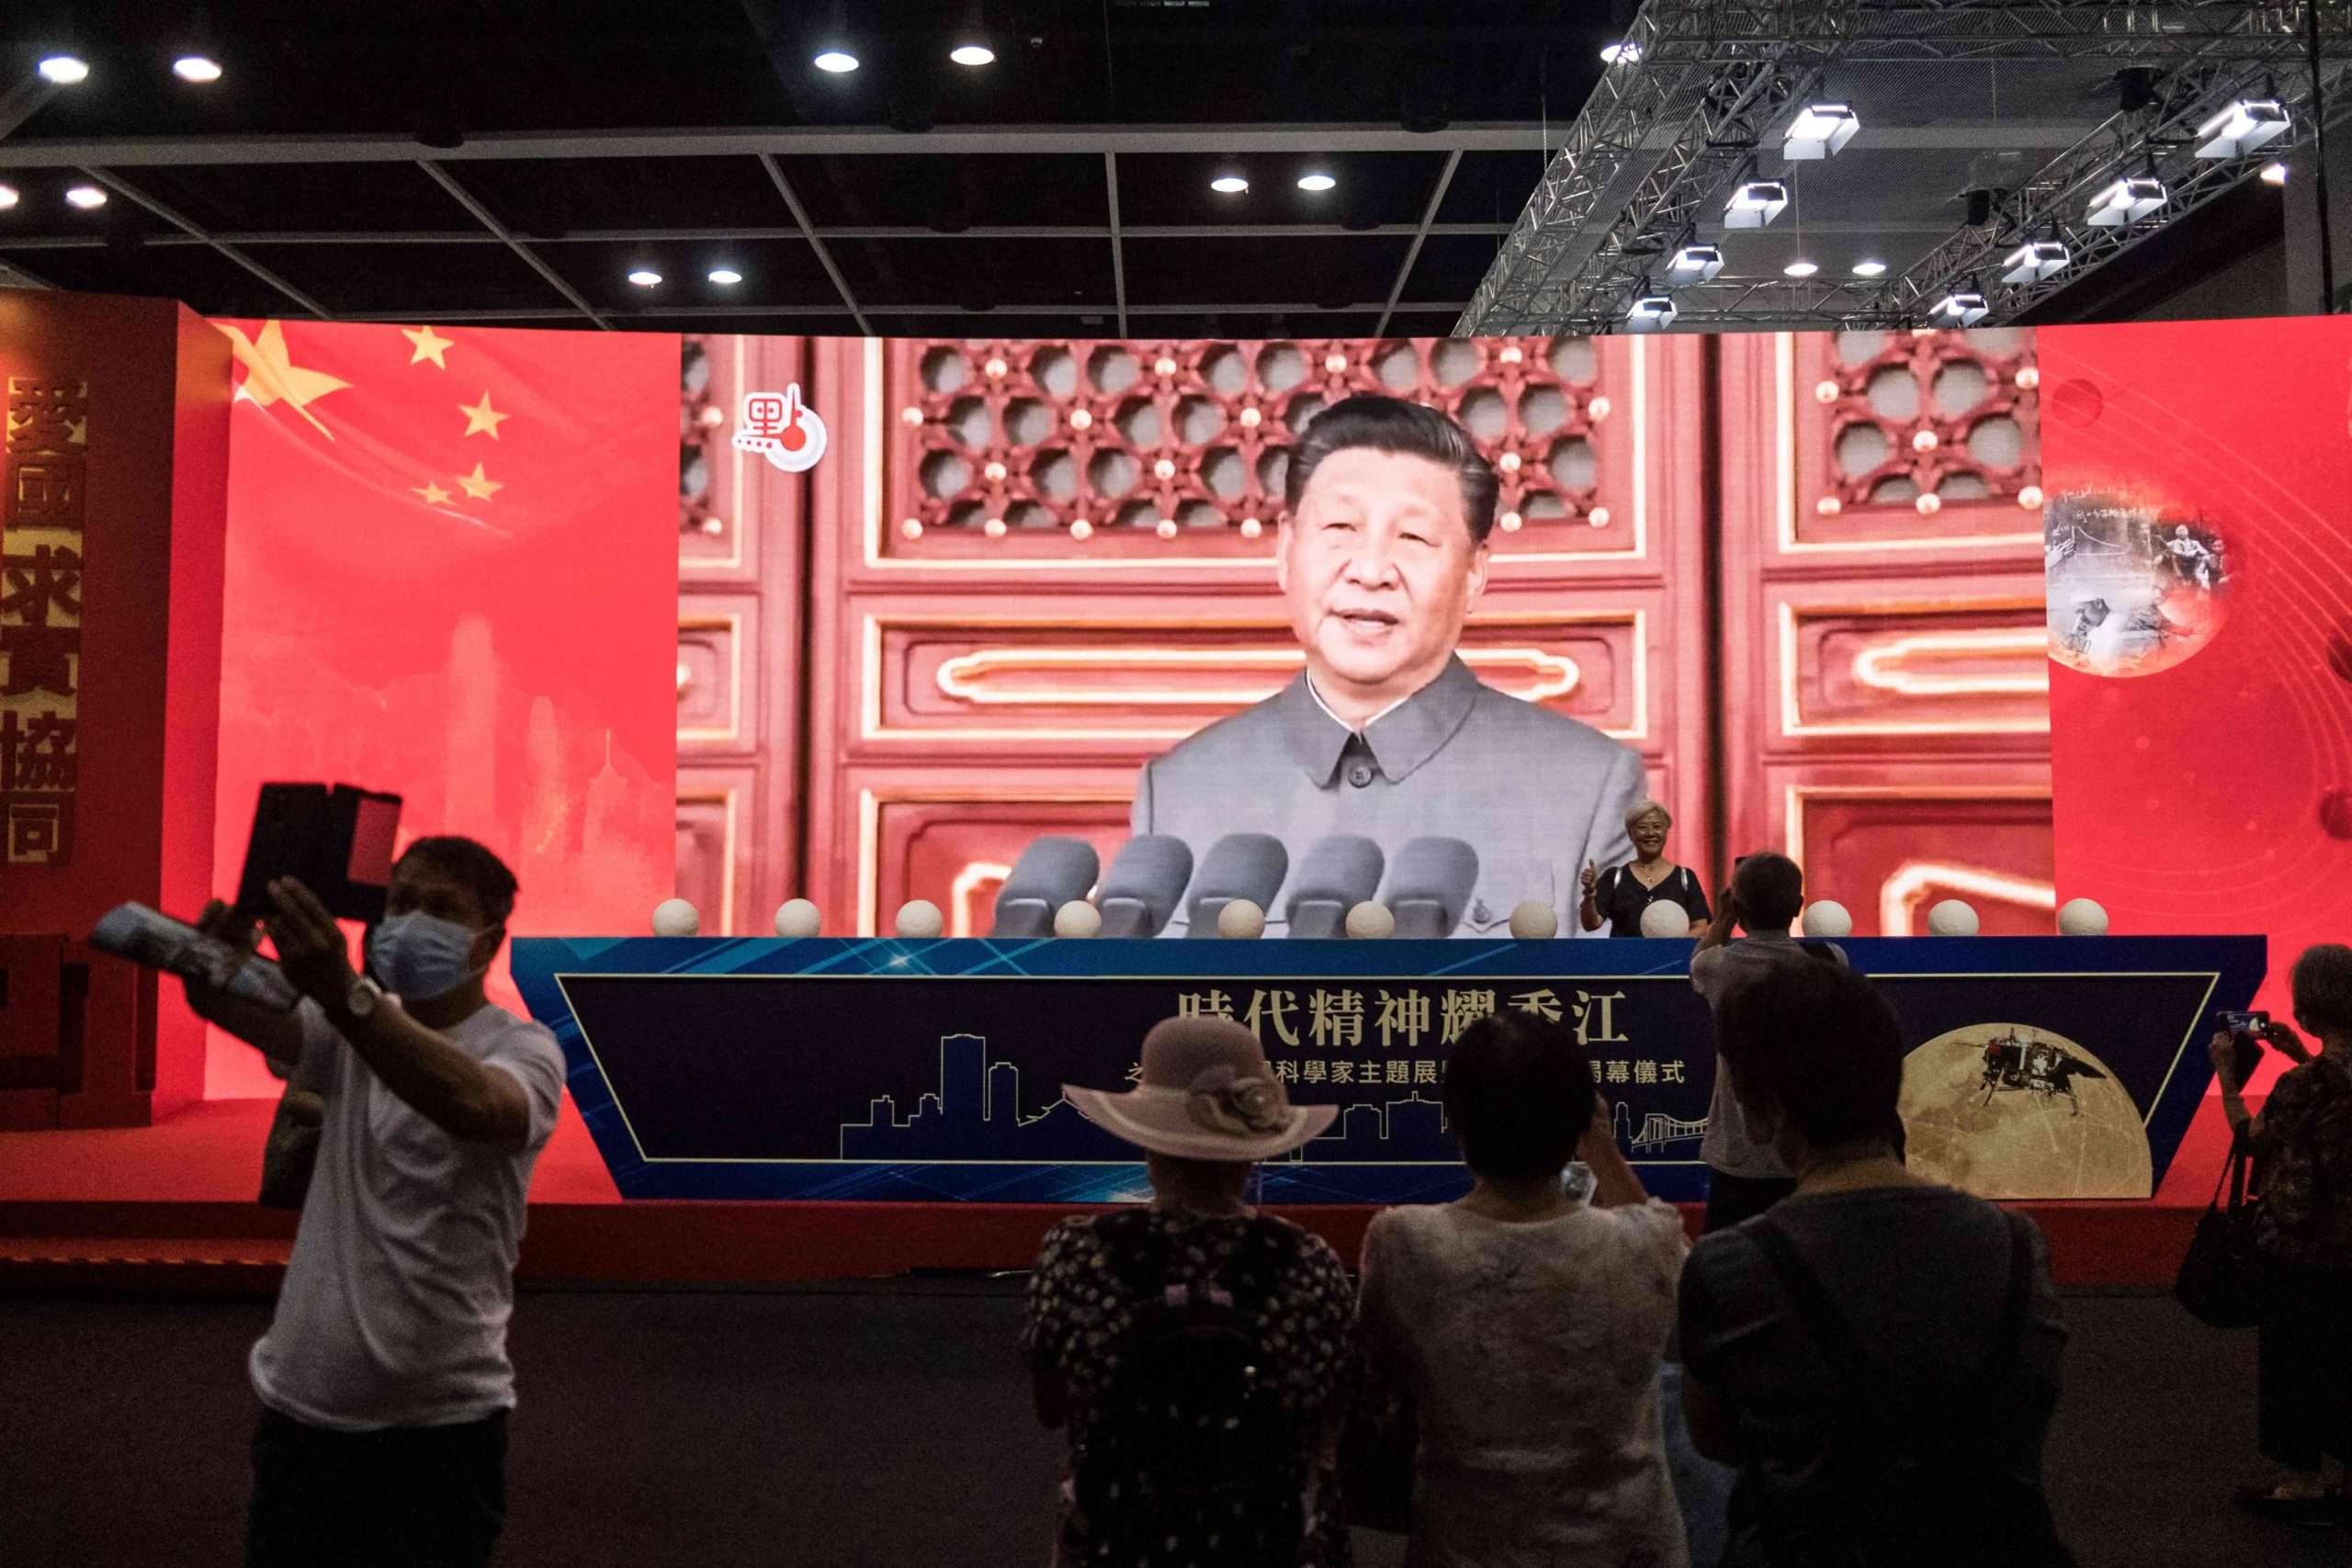 Blog: As incomes rise, Xi will have to change his China model